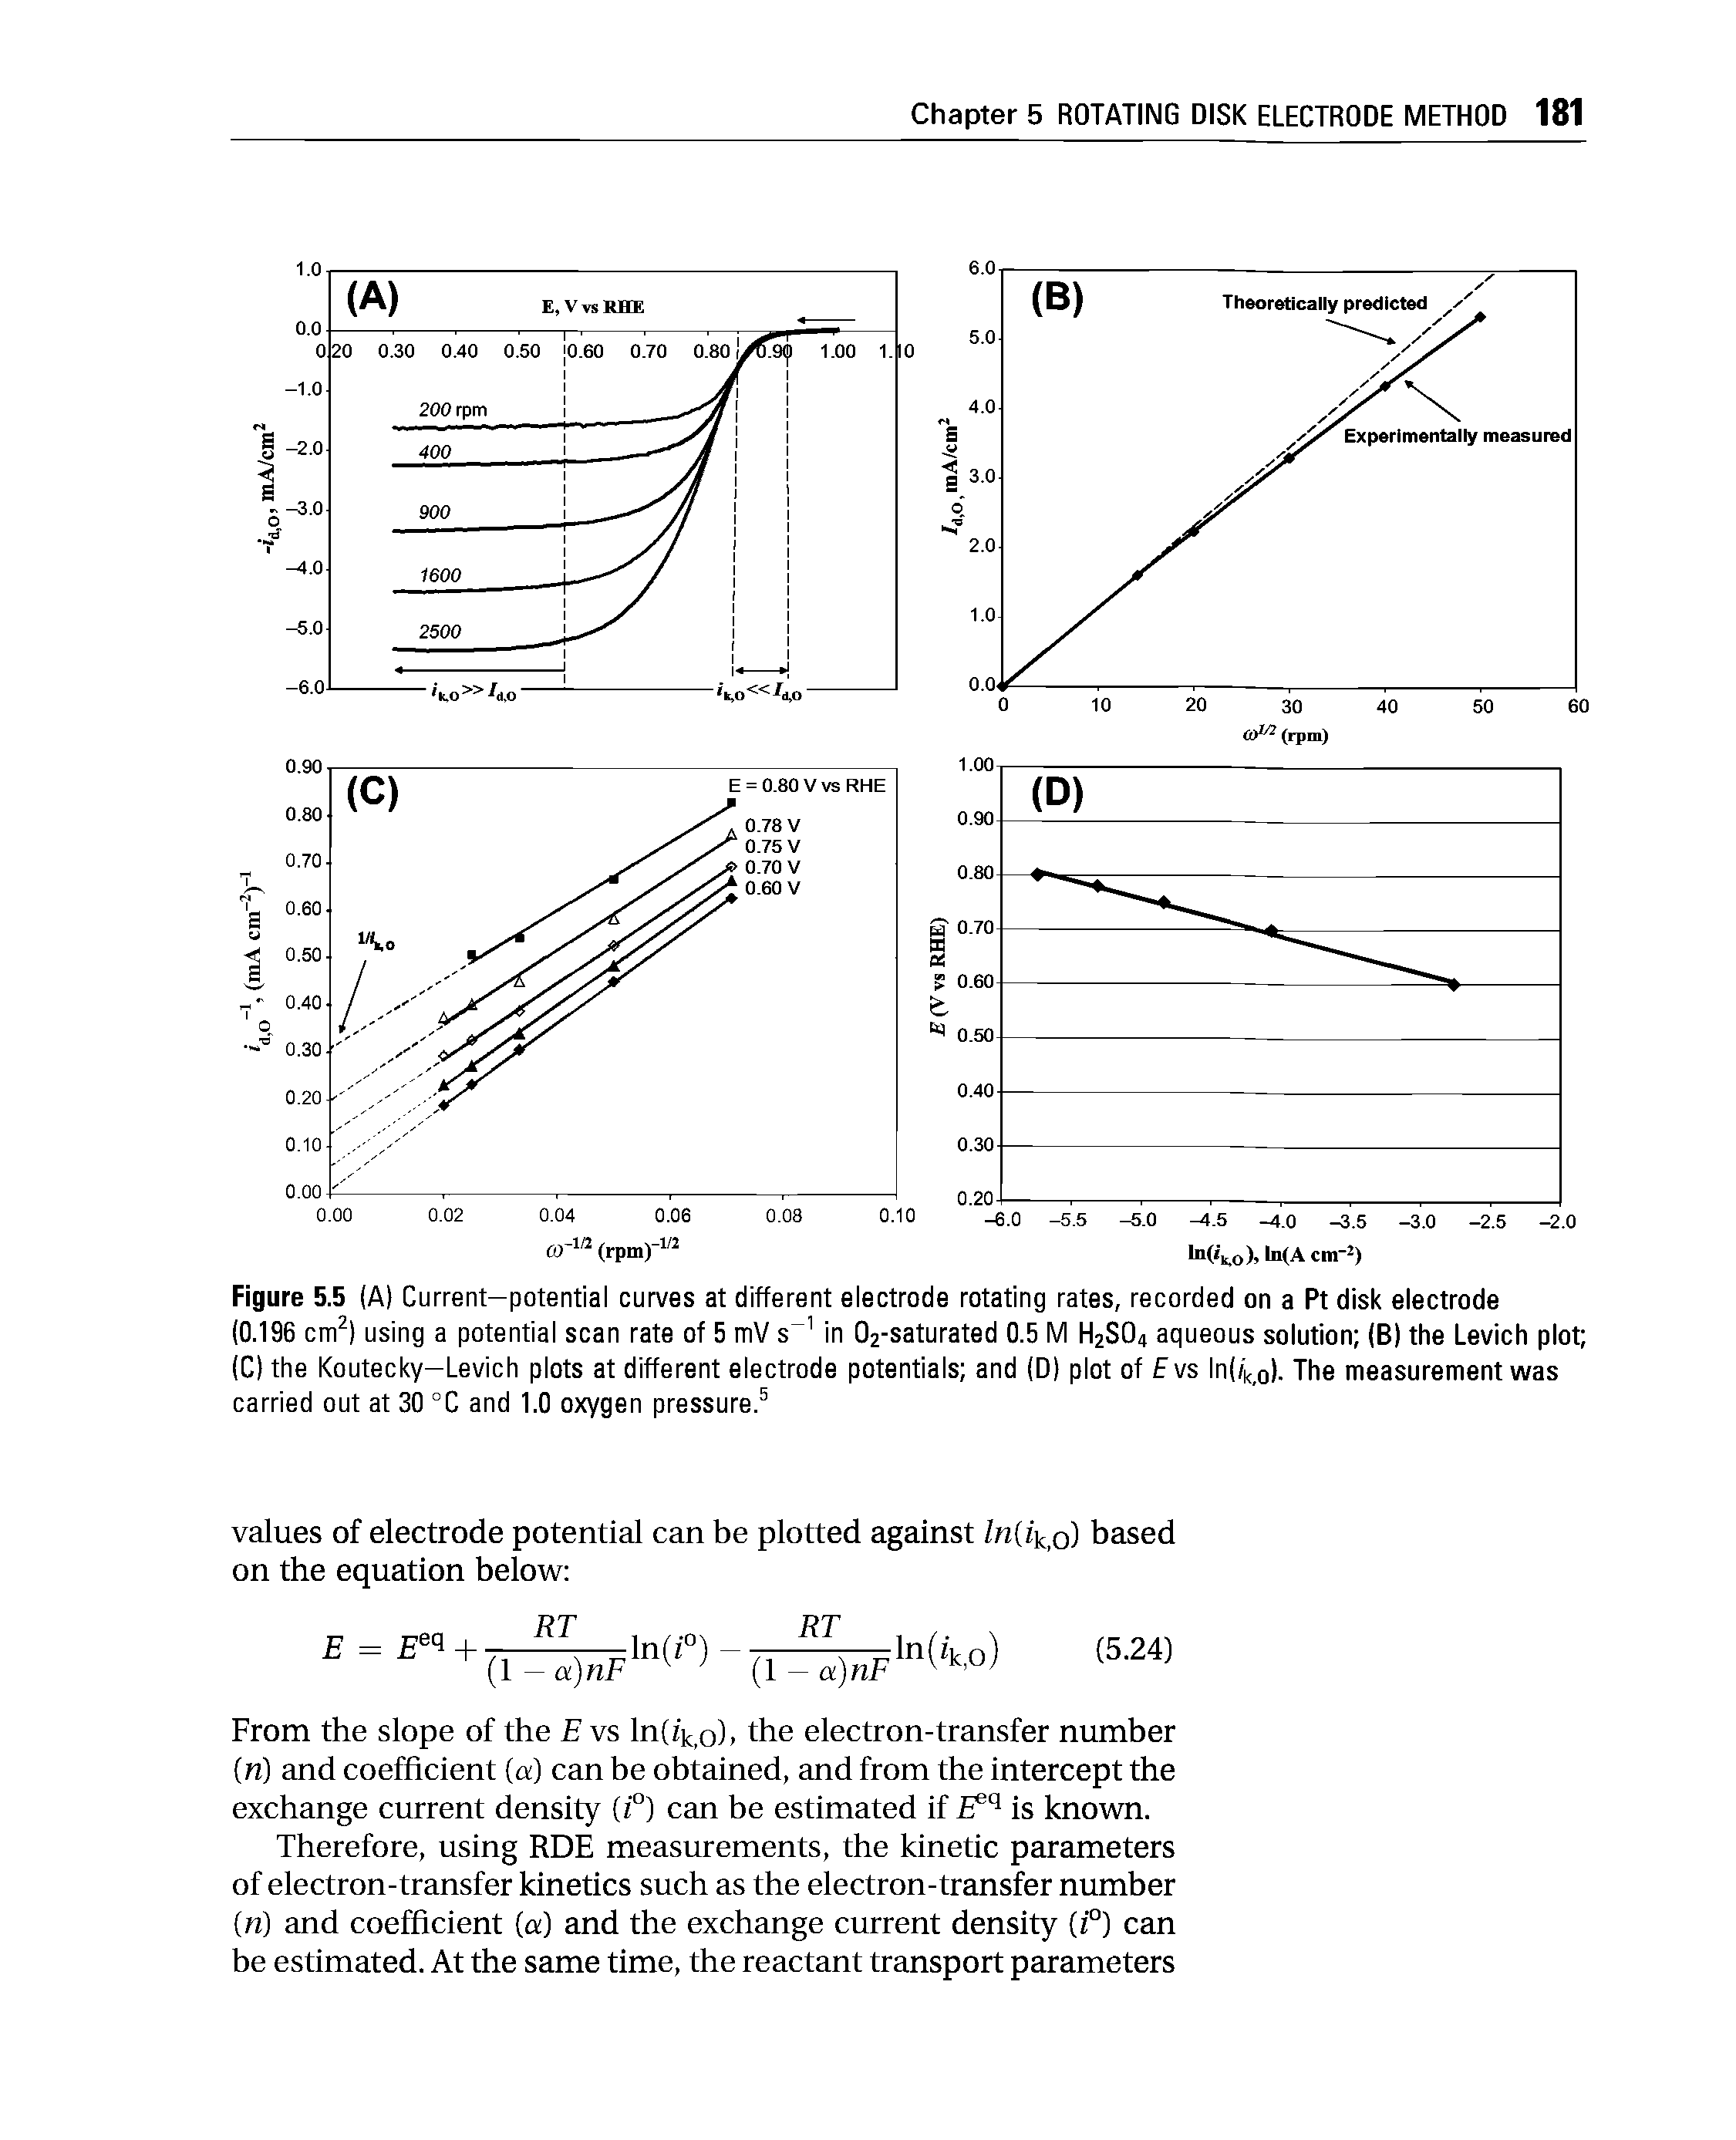 Figure 5.5 (A) Current-potential curves at different electrode rotating rates, recorded on a Pt disk electrode (0.196 cm ) using a potential scan rate of 5 mV s in Oa-saturated 0.5 M H2SO4 aqueous solution (B) the Levich plot (C) the Koutecky—Levich plots at different electrode potentials and (D) plot of E vs ln(/i<,o). The measurement was...